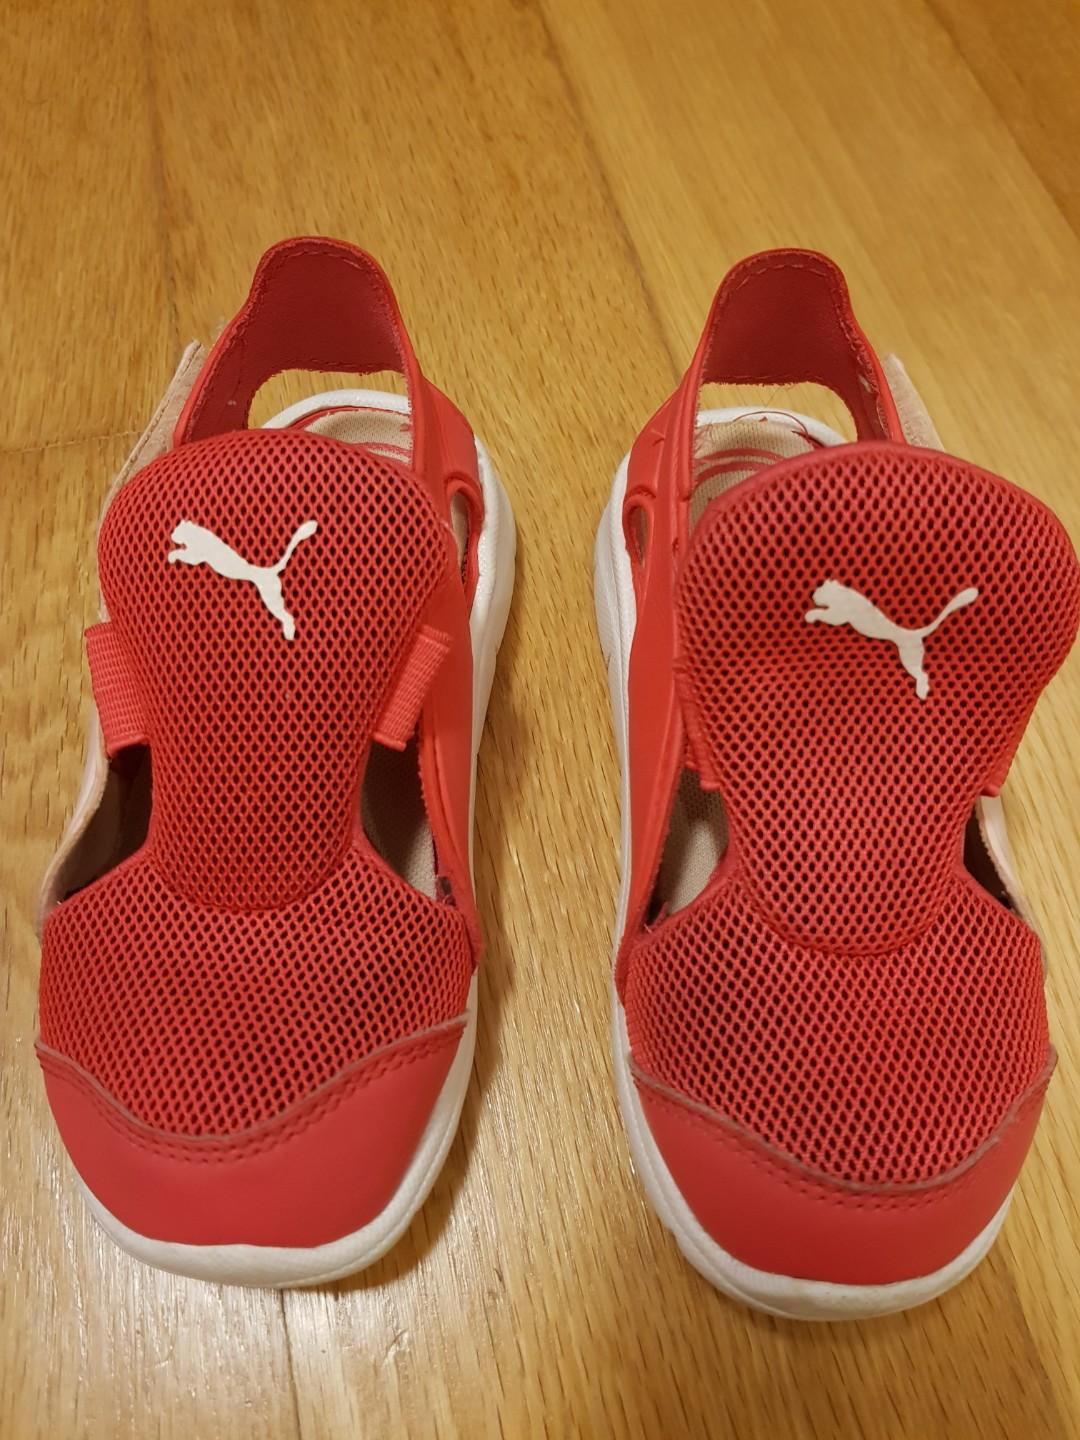 puma sandals for toddlers